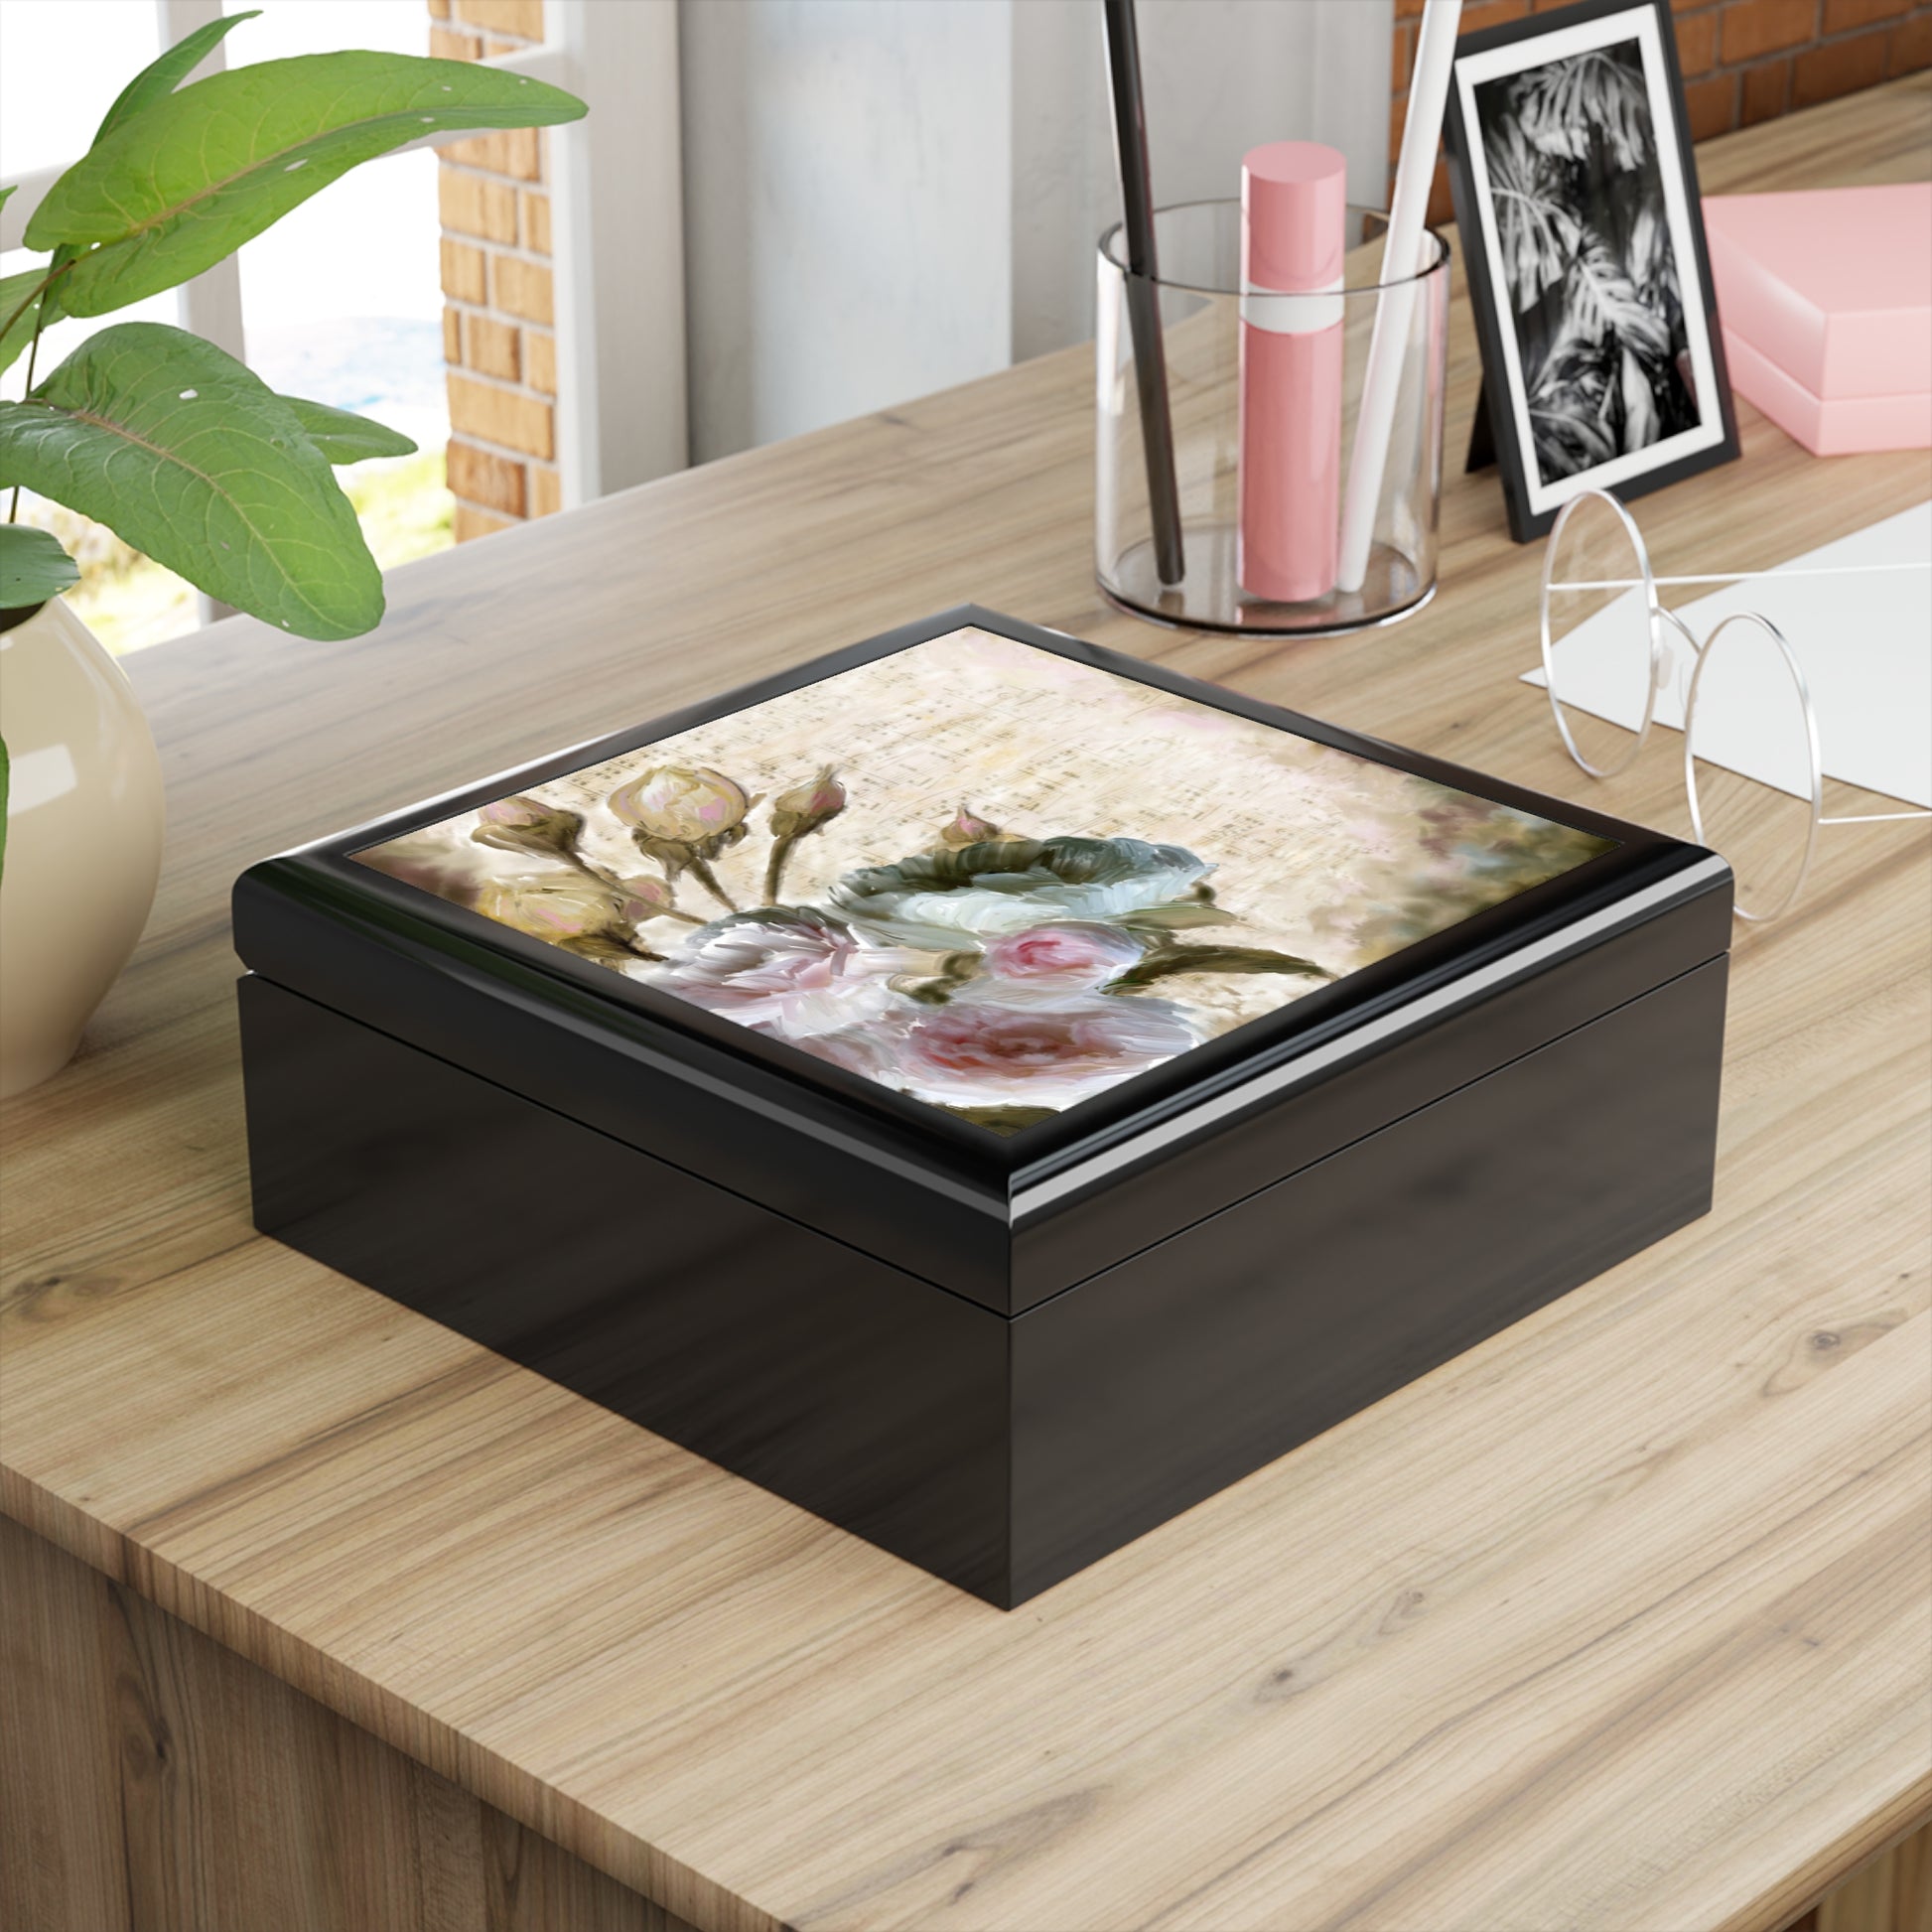 Lacquered Wood Keepsake/Jewelry Box - Roses and Music Notes black square box